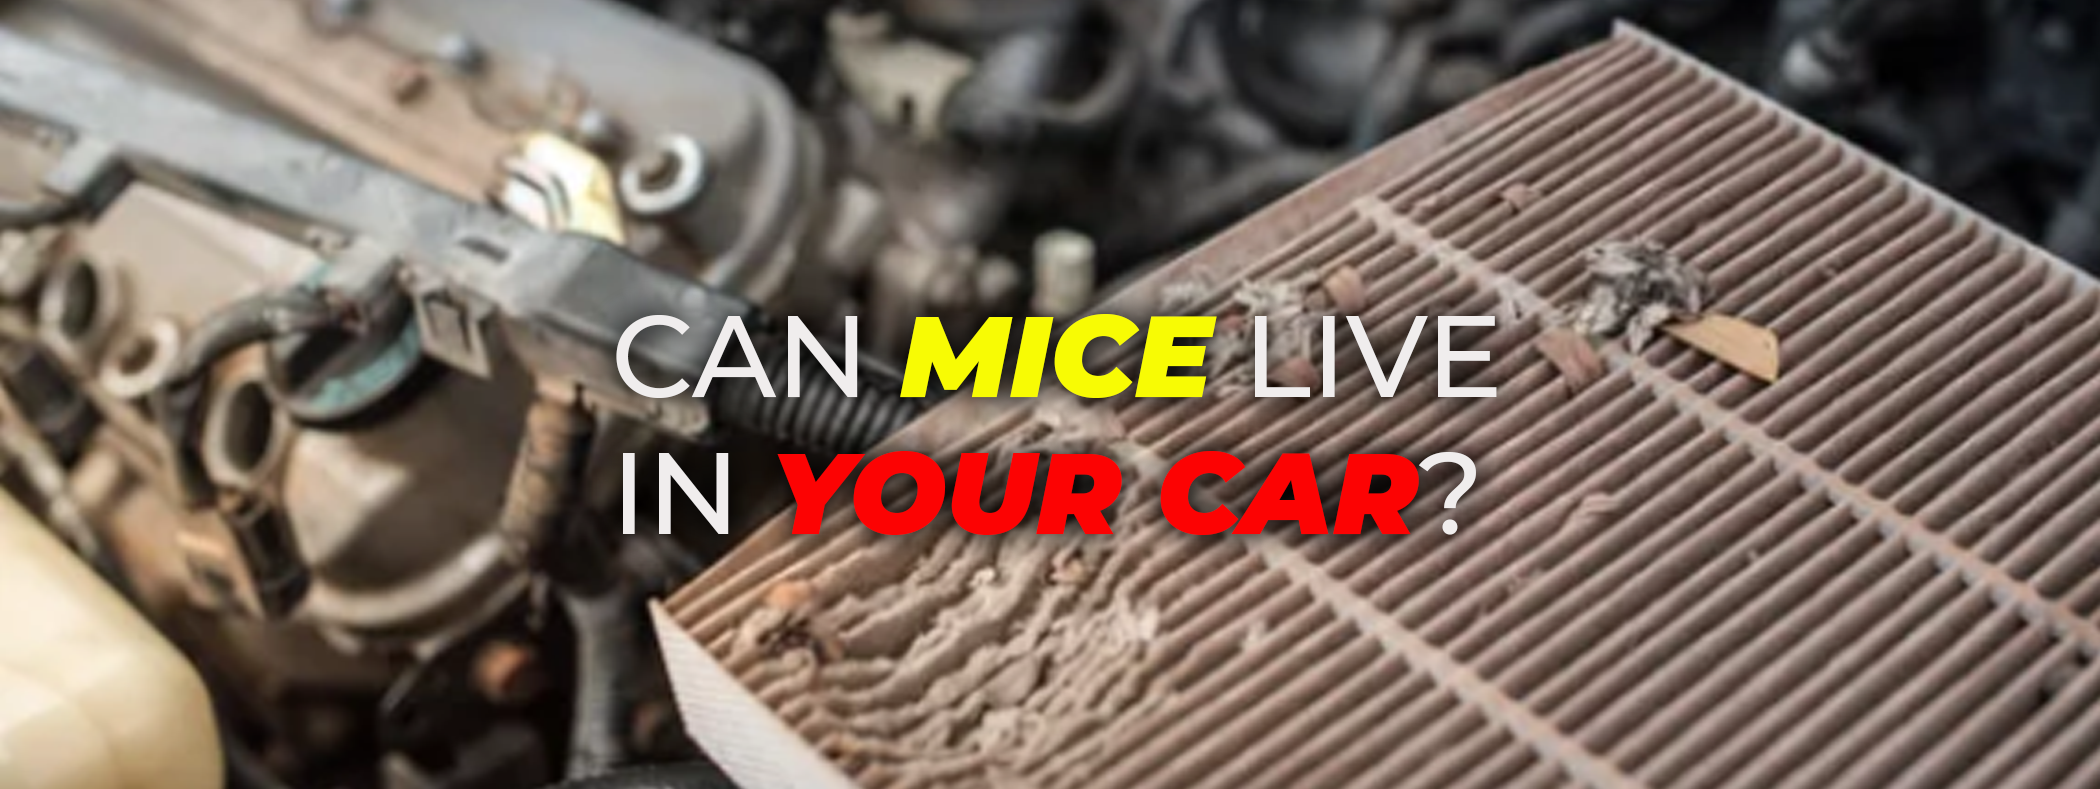 Can Mice Live in Your Car